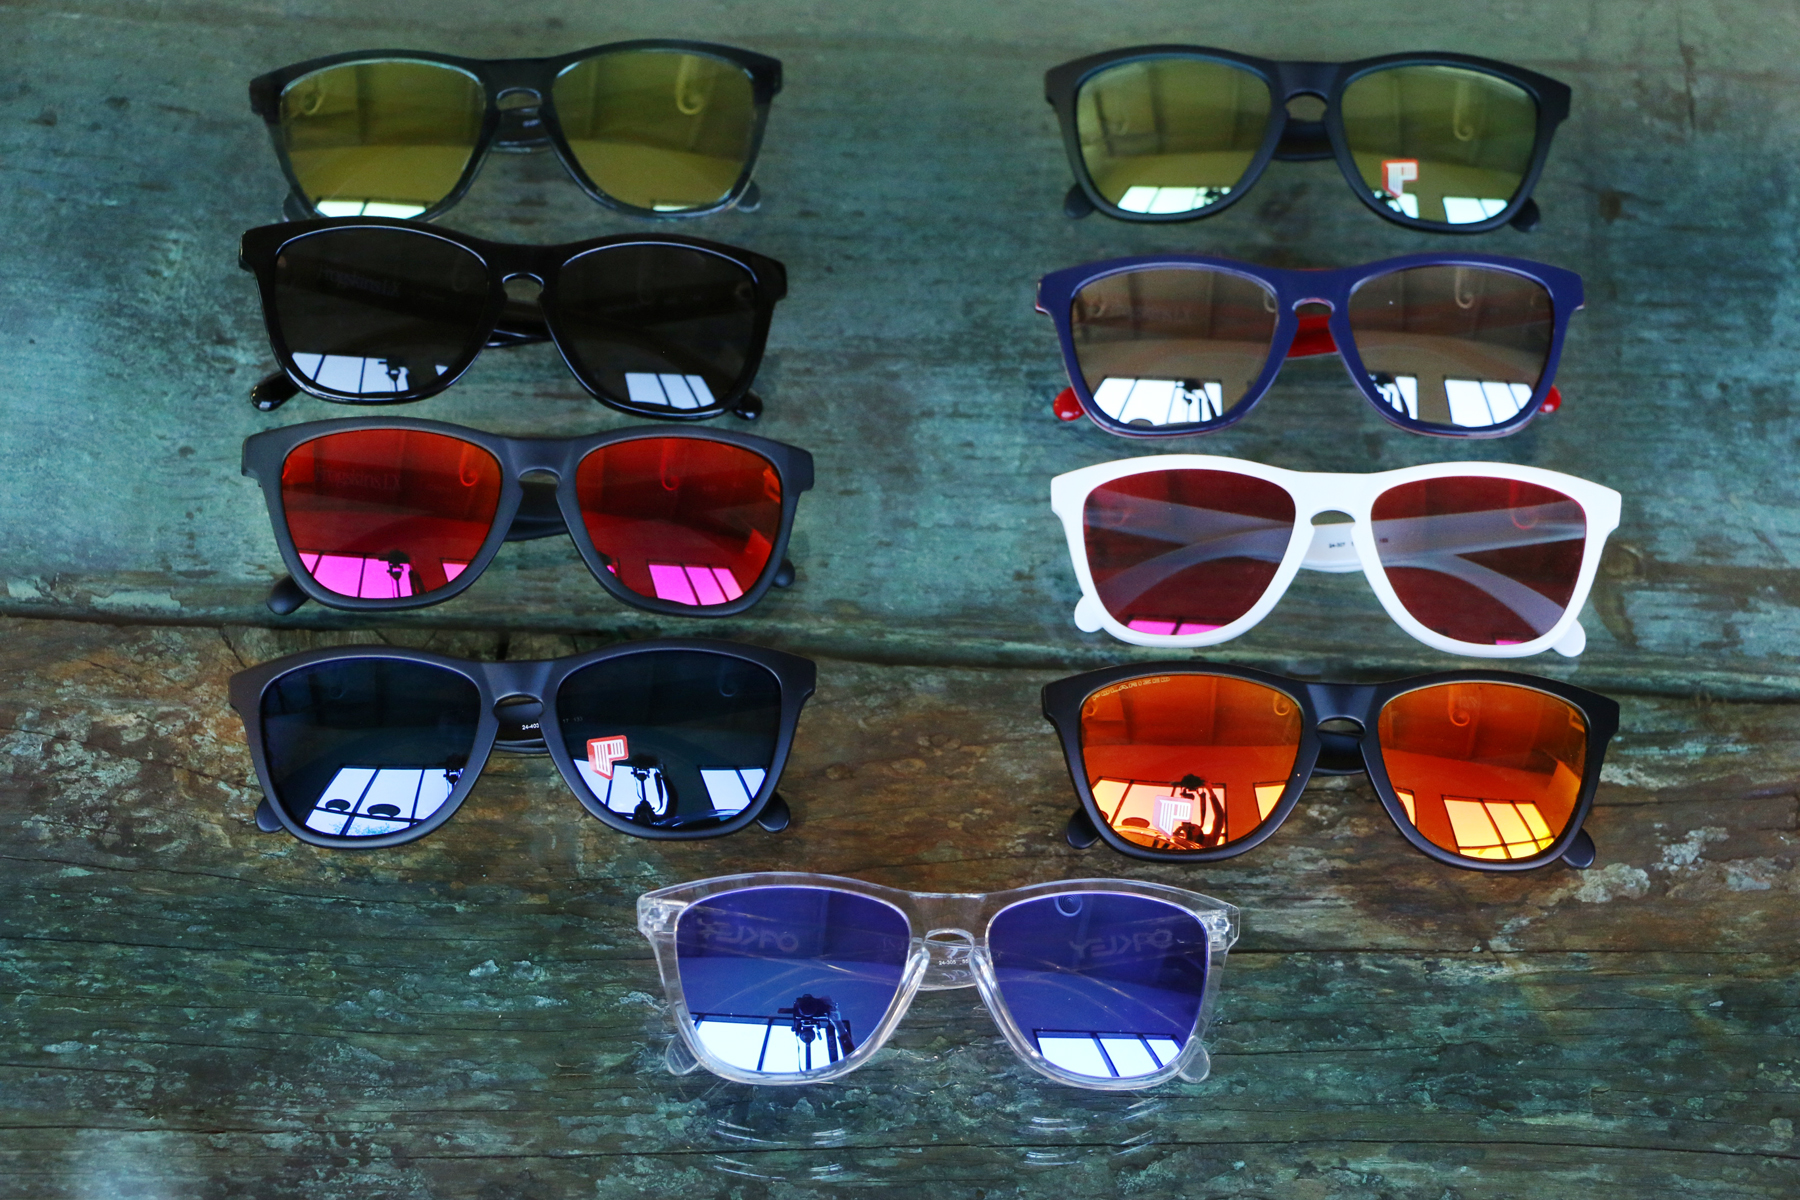 Oakley Frogskins. Get wit' it and get ribbit. | SportRx